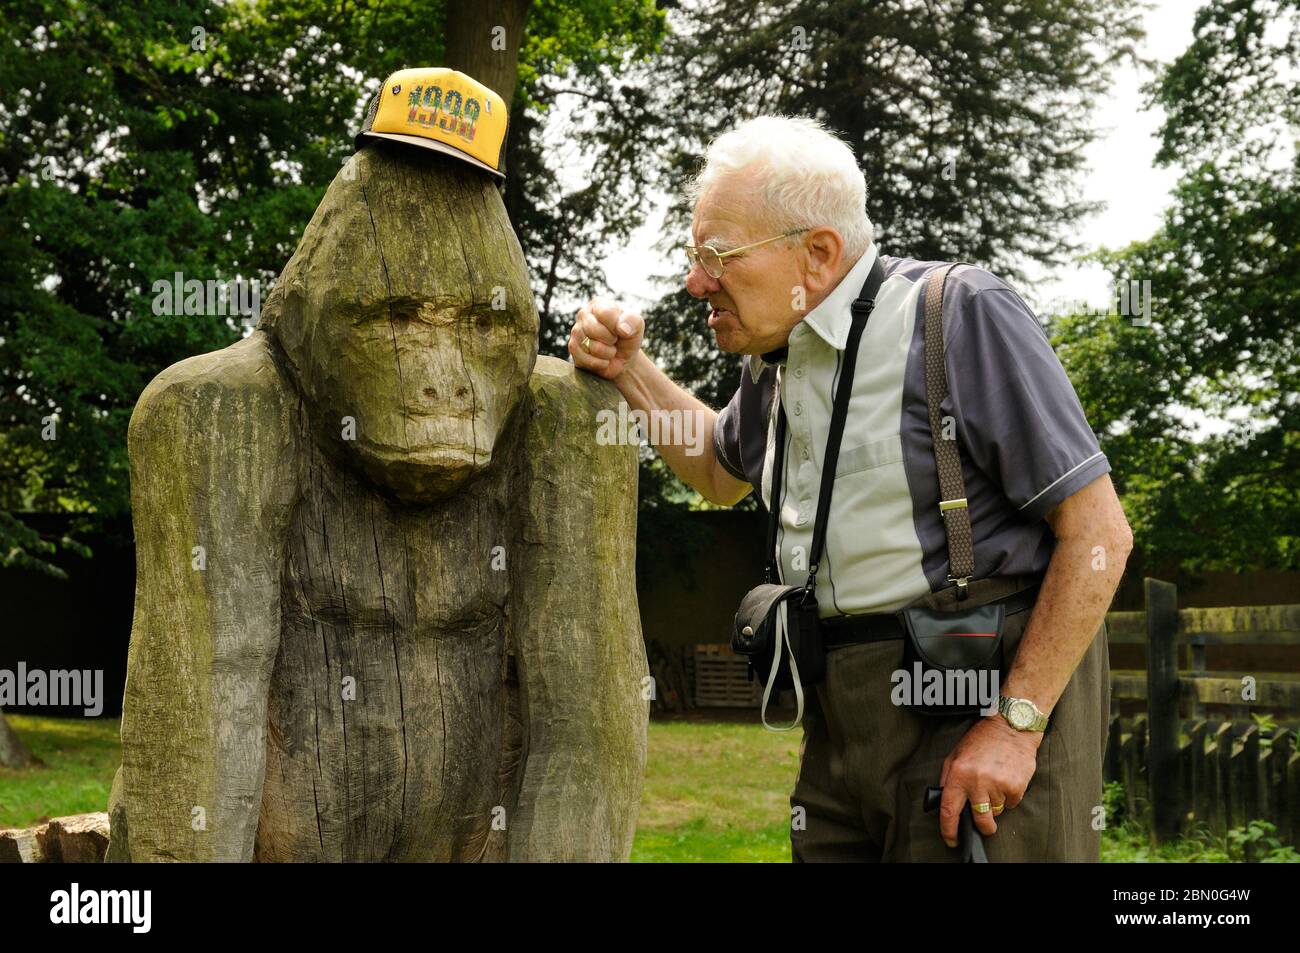 Elderly man having fun with his baseball cap and a carved wooden gorilla at the Elsham Hall country park, Lincolnshire, England Stock Photo